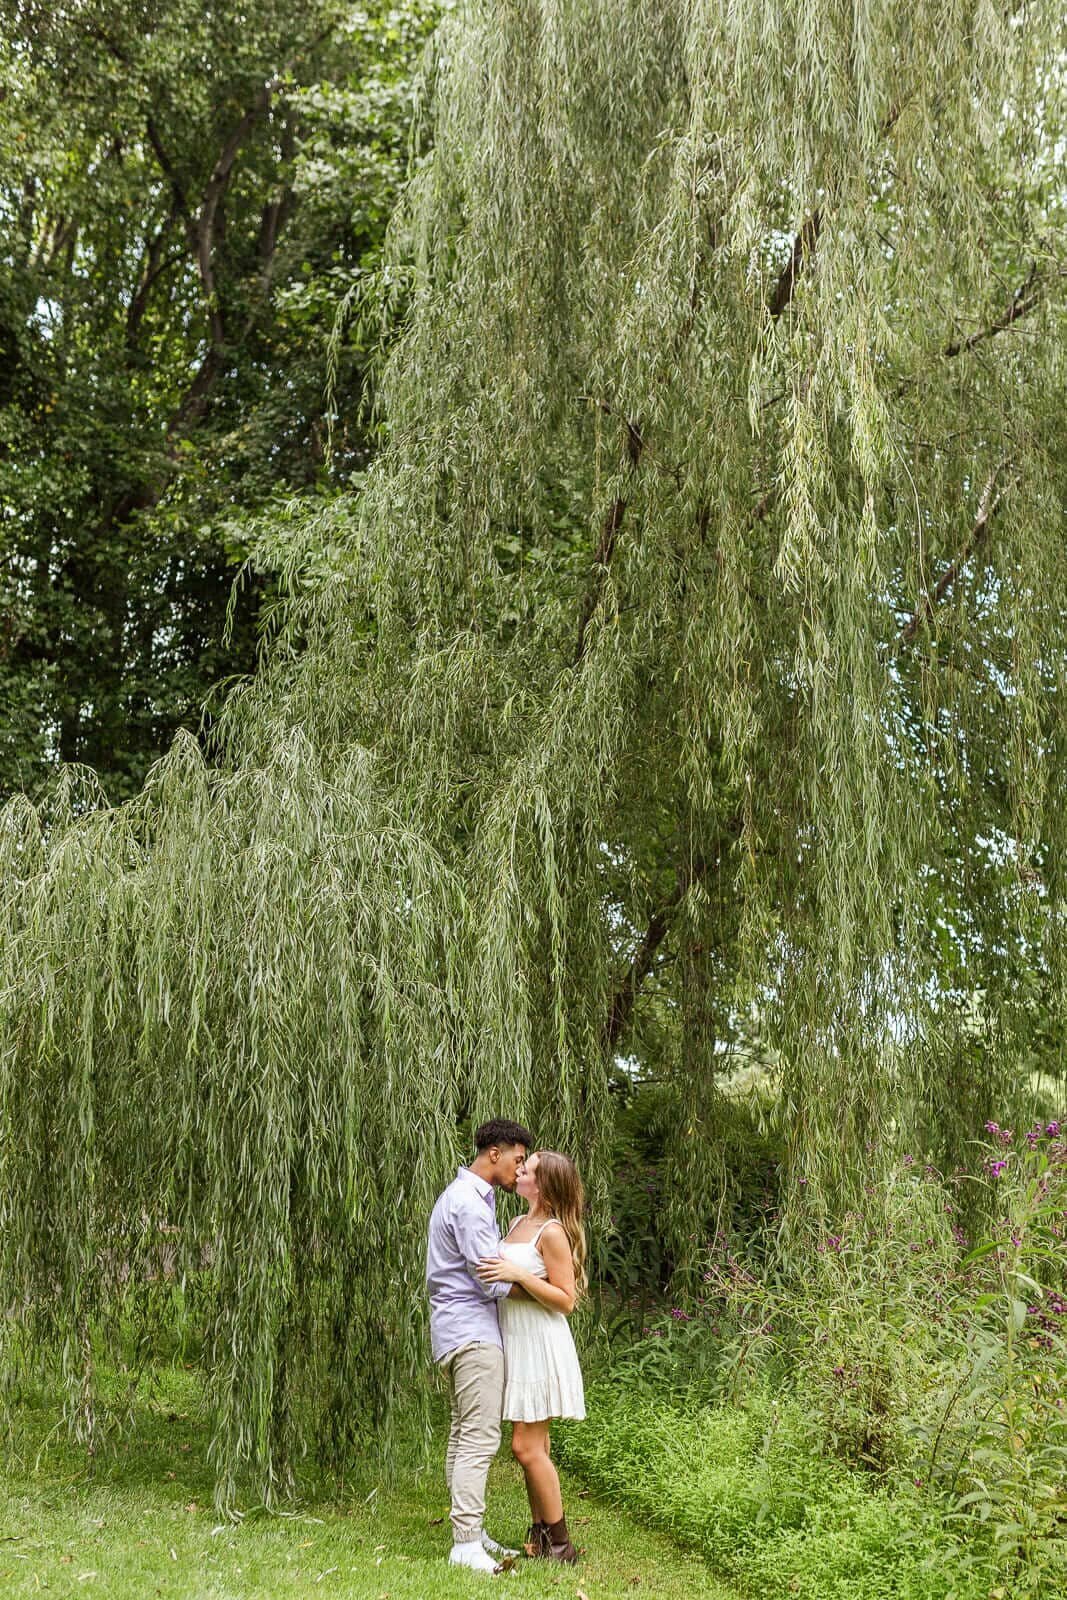 44-kara-loryn-photography-engaged-couple-kissing-by-a-tree